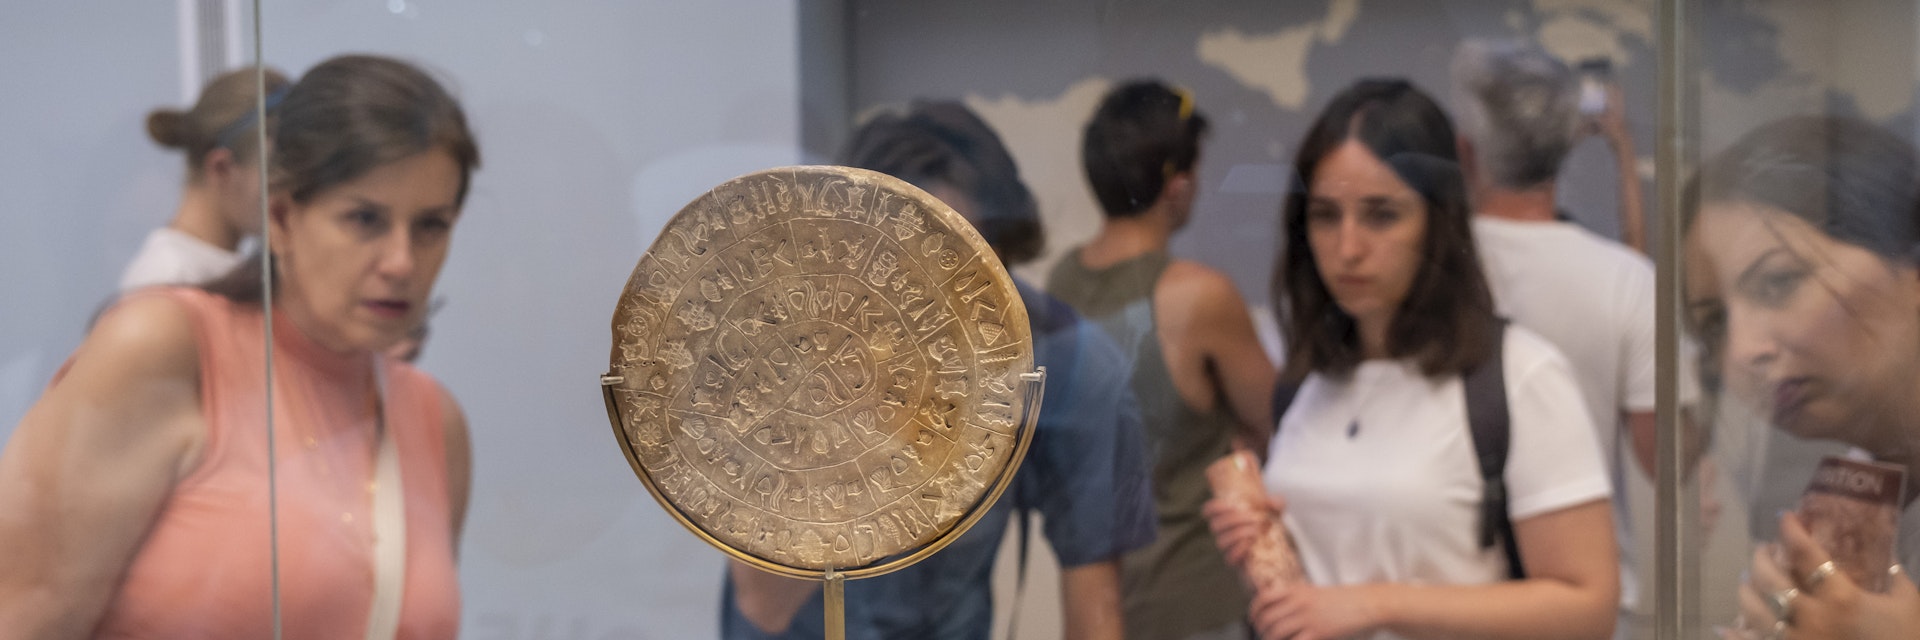 Tourists looking at the Phaistos Disc inside the archaeological museum of Heraklion in Crete that hold the most important and complete collection of the Minoan civilisation of Crete on the 28th of August 2022 in Crete, Greece. Many of the artefacts  in the museum come from Knossos, the largest Bronze Age archaeological site on the Greek island of Crete. (photo by Andrew Aitchison / In pictures via Getty Images)
1245671474
aitchison, greek, heraklion, neolithic, phaistos disc, archaeological, artefacts, ceremonial, civilization, culture, explore, holiday, remains, statues, tourists, viewing